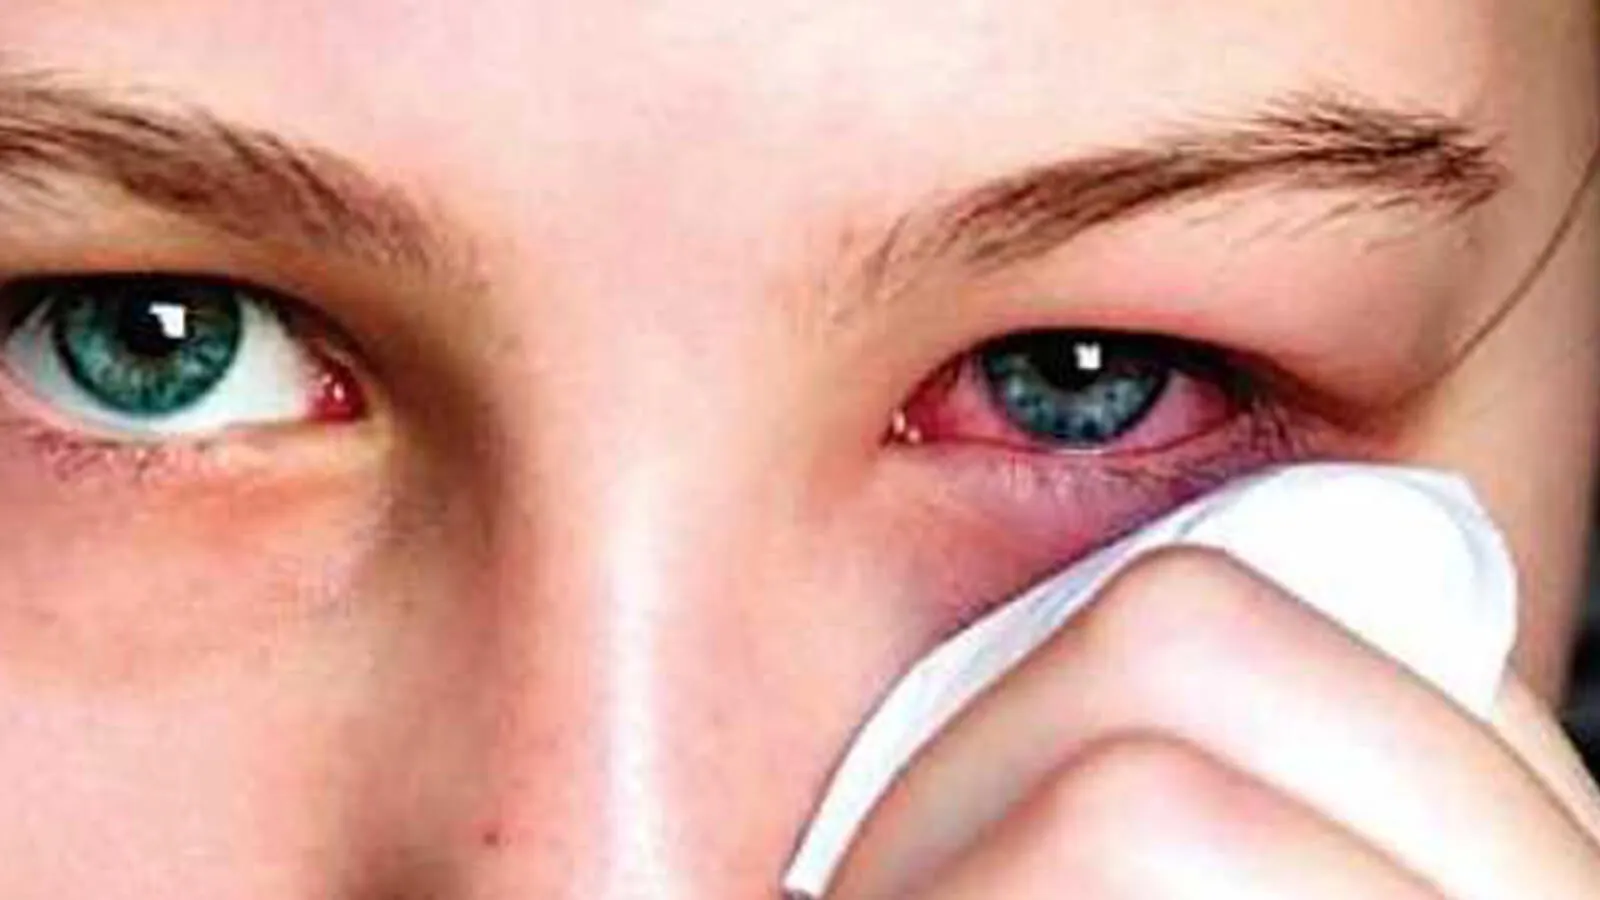 smoking causes eye infections